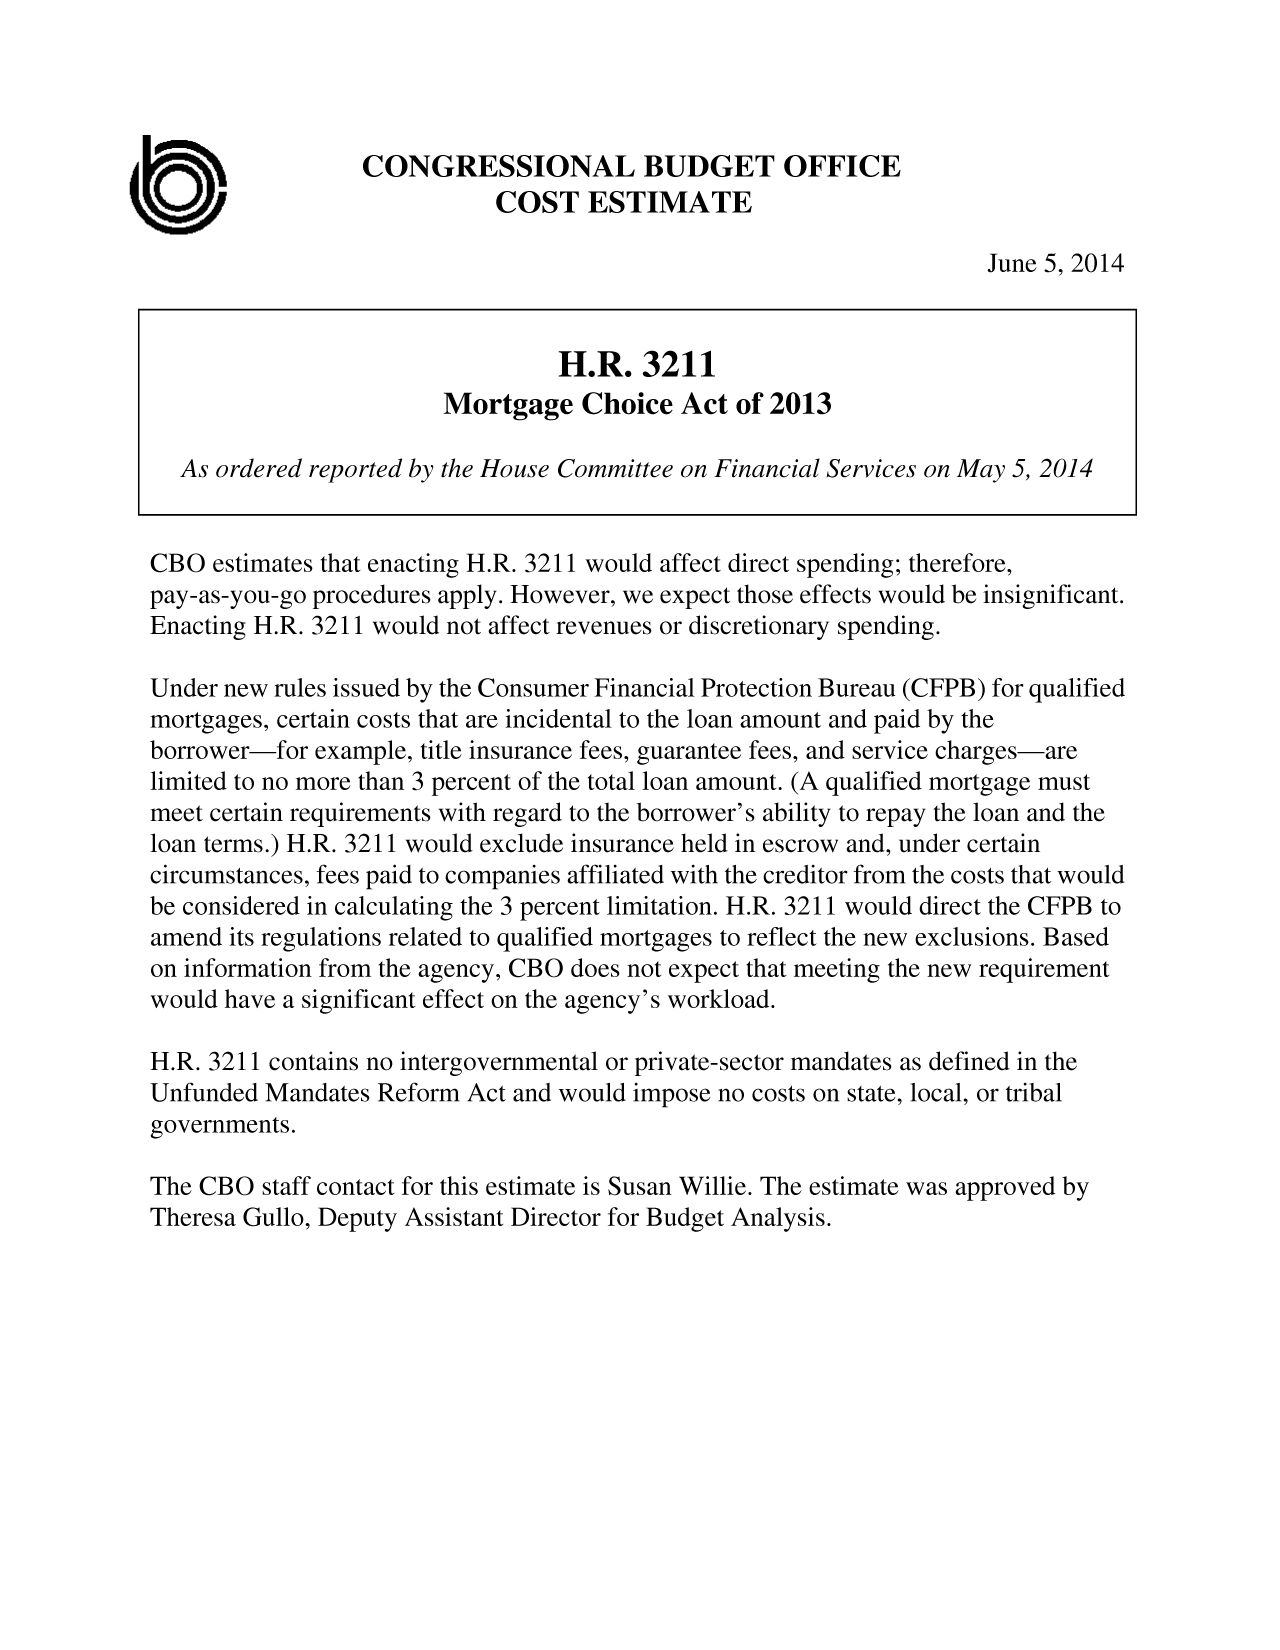 handle is hein.congrec/cbo1722 and id is 1 raw text is: CONGRESSIONAL BUDGET OFFICE
COST ESTIMATE
June 5, 2014
H.R. 3211
Mortgage Choice Act of 2013
As ordered reported by the House Committee on Financial Services on May 5, 2014
CBO estimates that enacting H.R. 3211 would affect direct spending; therefore,
pay-as-you-go procedures apply. However, we expect those effects would be insignificant.
Enacting H.R. 3211 would not affect revenues or discretionary spending.
Under new rules issued by the Consumer Financial Protection Bureau (CFPB) for qualified
mortgages, certain costs that are incidental to the loan amount and paid by the
borrower-for example, title insurance fees, guarantee fees, and service charges-are
limited to no more than 3 percent of the total loan amount. (A qualified mortgage must
meet certain requirements with regard to the borrower's ability to repay the loan and the
loan terms.) H.R. 3211 would exclude insurance held in escrow and, under certain
circumstances, fees paid to companies affiliated with the creditor from the costs that would
be considered in calculating the 3 percent limitation. H.R. 3211 would direct the CFPB to
amend its regulations related to qualified mortgages to reflect the new exclusions. Based
on information from the agency, CBO does not expect that meeting the new requirement
would have a significant effect on the agency's workload.
H.R. 3211 contains no intergovernmental or private-sector mandates as defined in the
Unfunded Mandates Reform Act and would impose no costs on state, local, or tribal
governments.
The CBO staff contact for this estimate is Susan Willie. The estimate was approved by
Theresa Gullo, Deputy Assistant Director for Budget Analysis.


